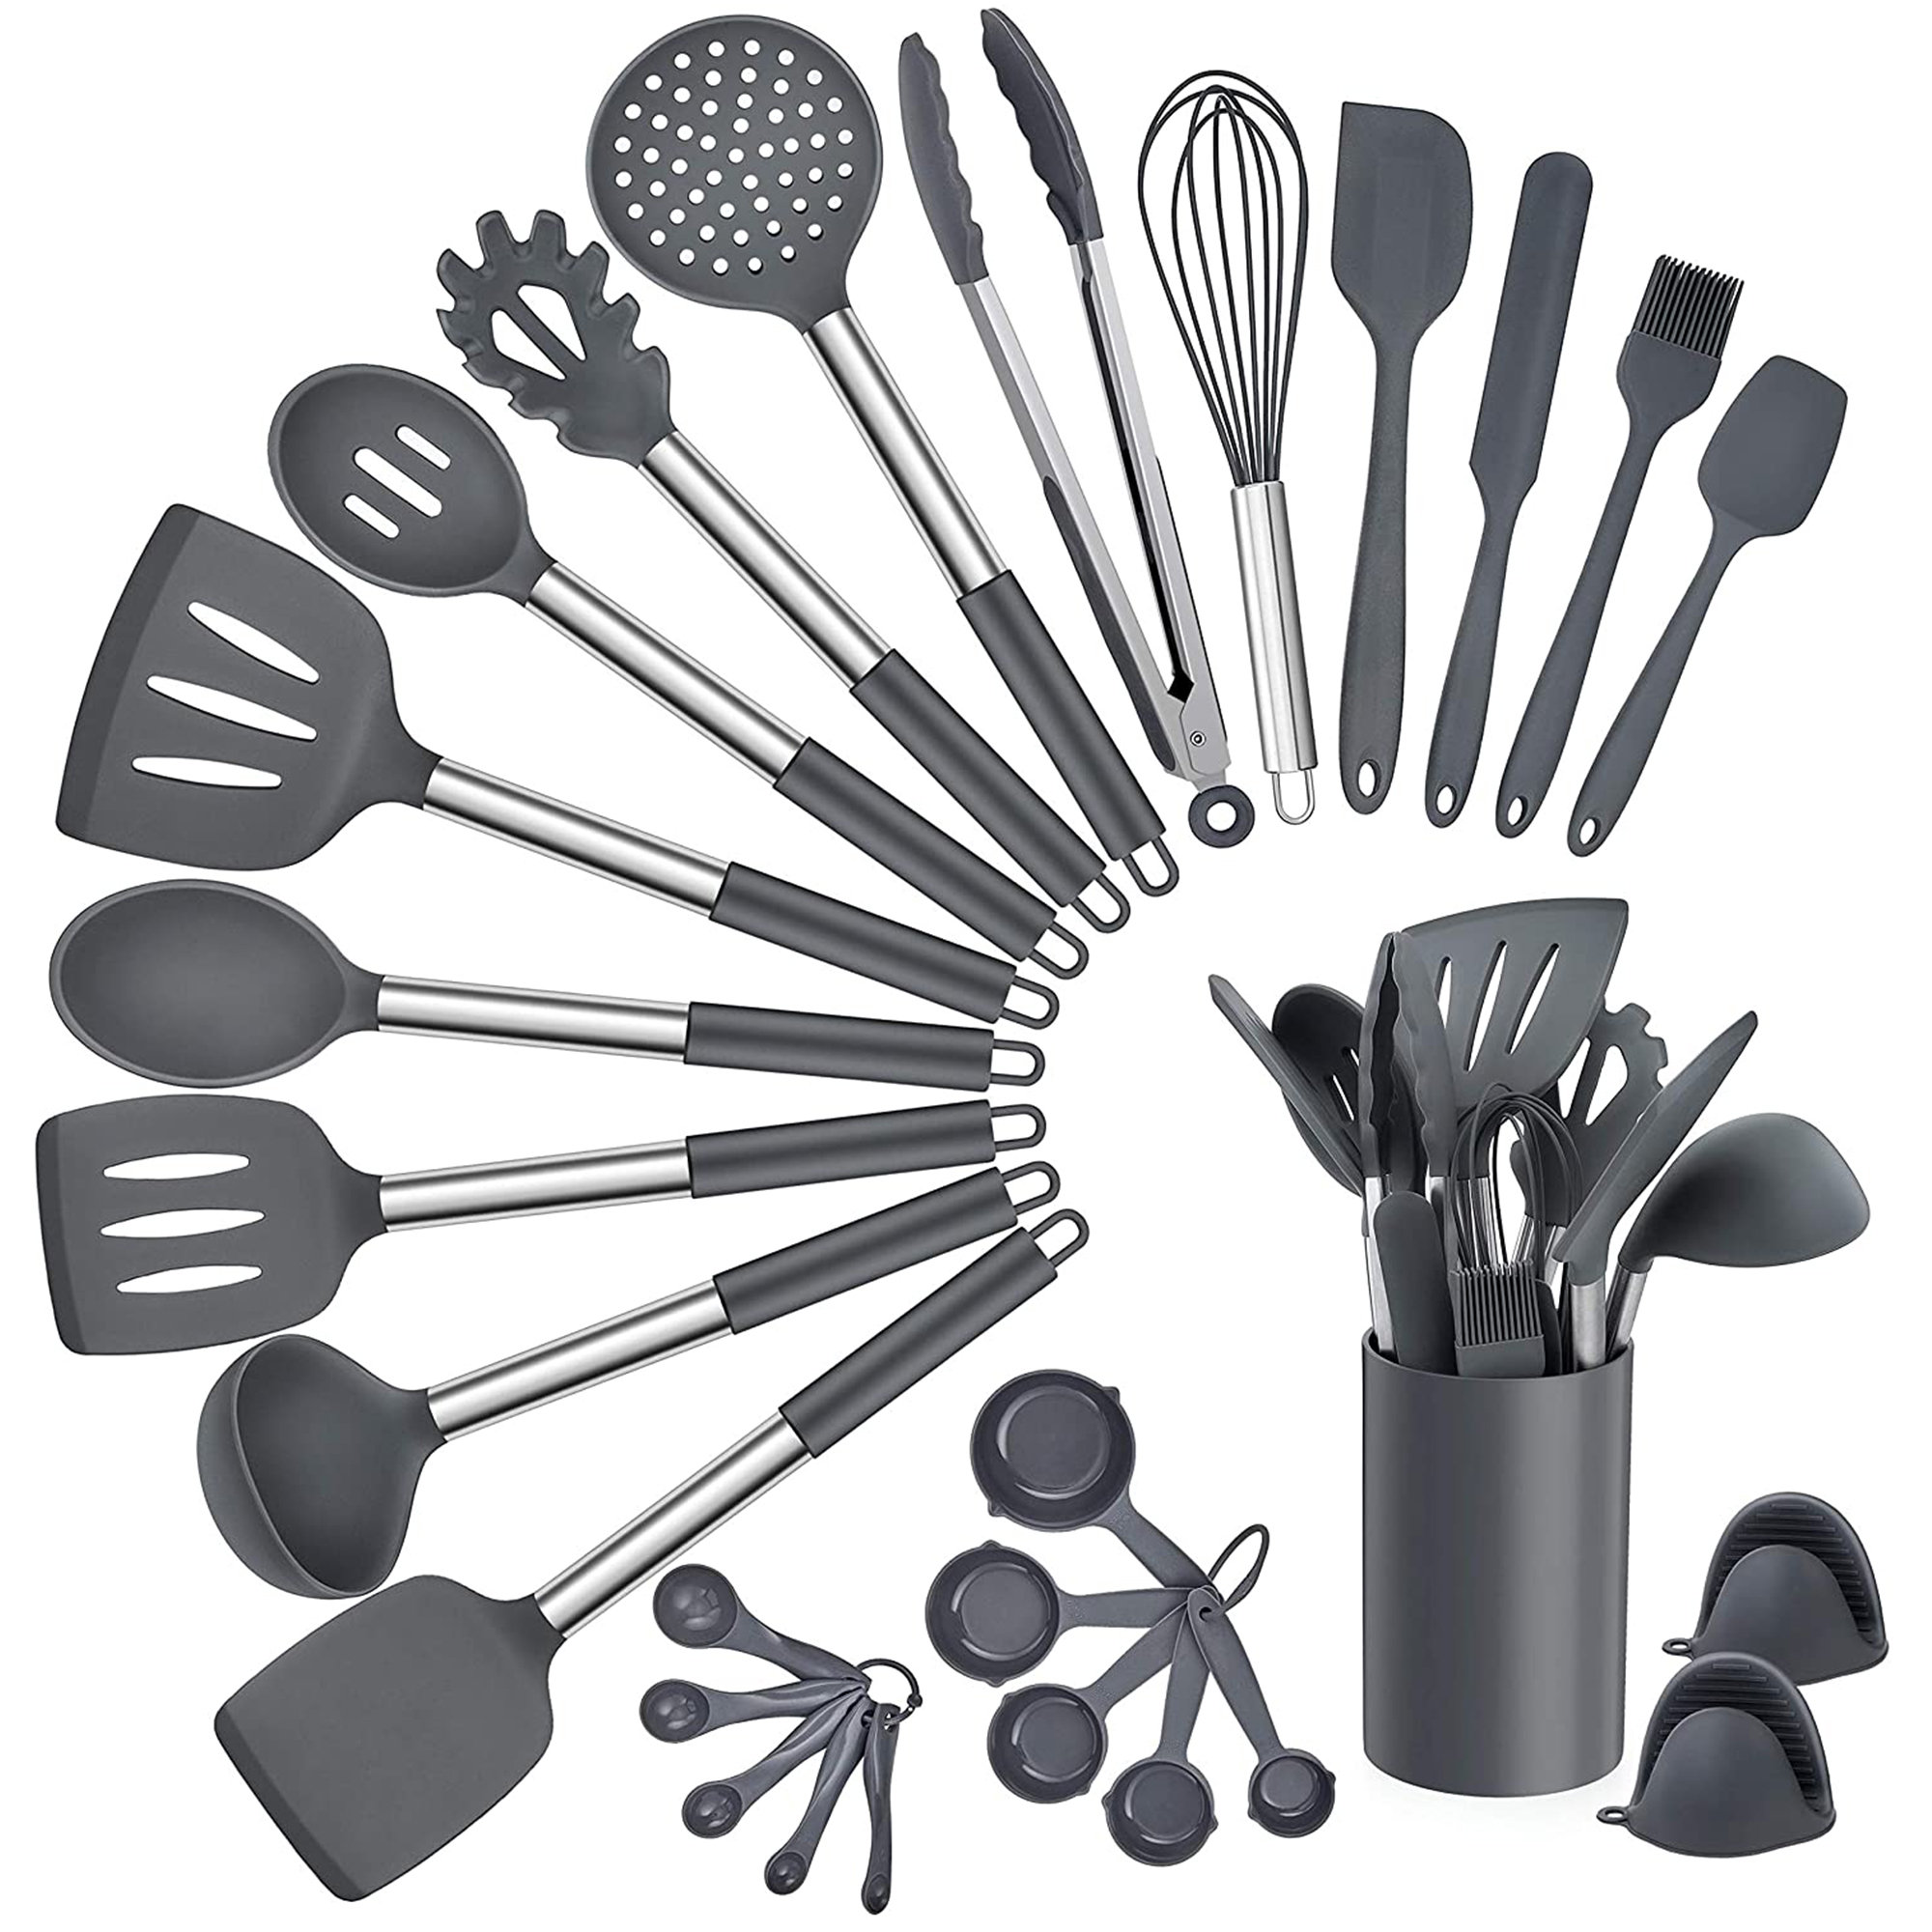 Gray All Silicone Flex Core Deep Spoon at Whole Foods Market